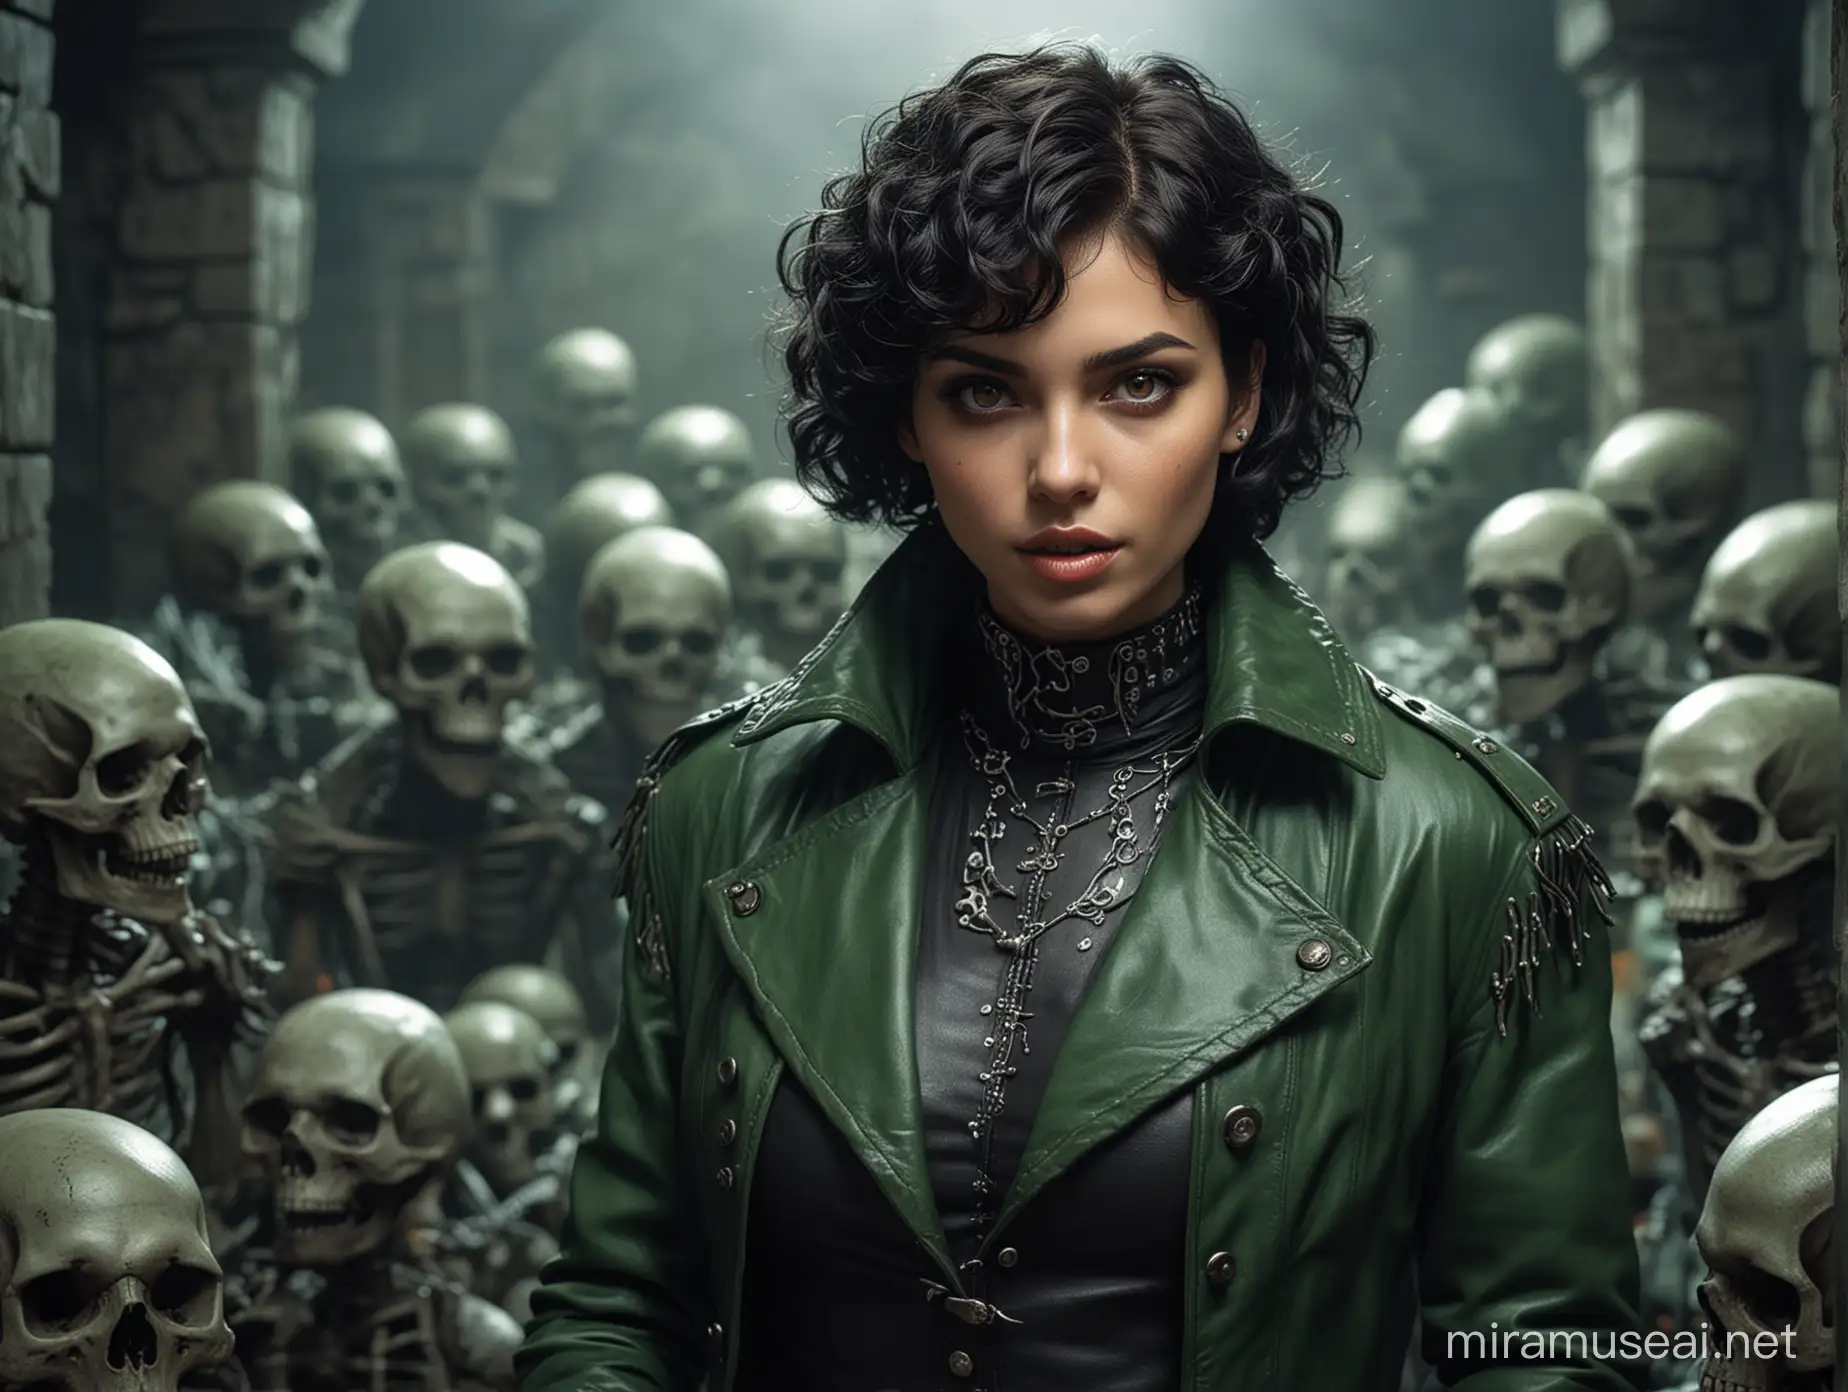 beautiful female necromancer with short black curly hair, brown eyes, big lips, round face, green leather coat, attacked by skeletons in a dungeon